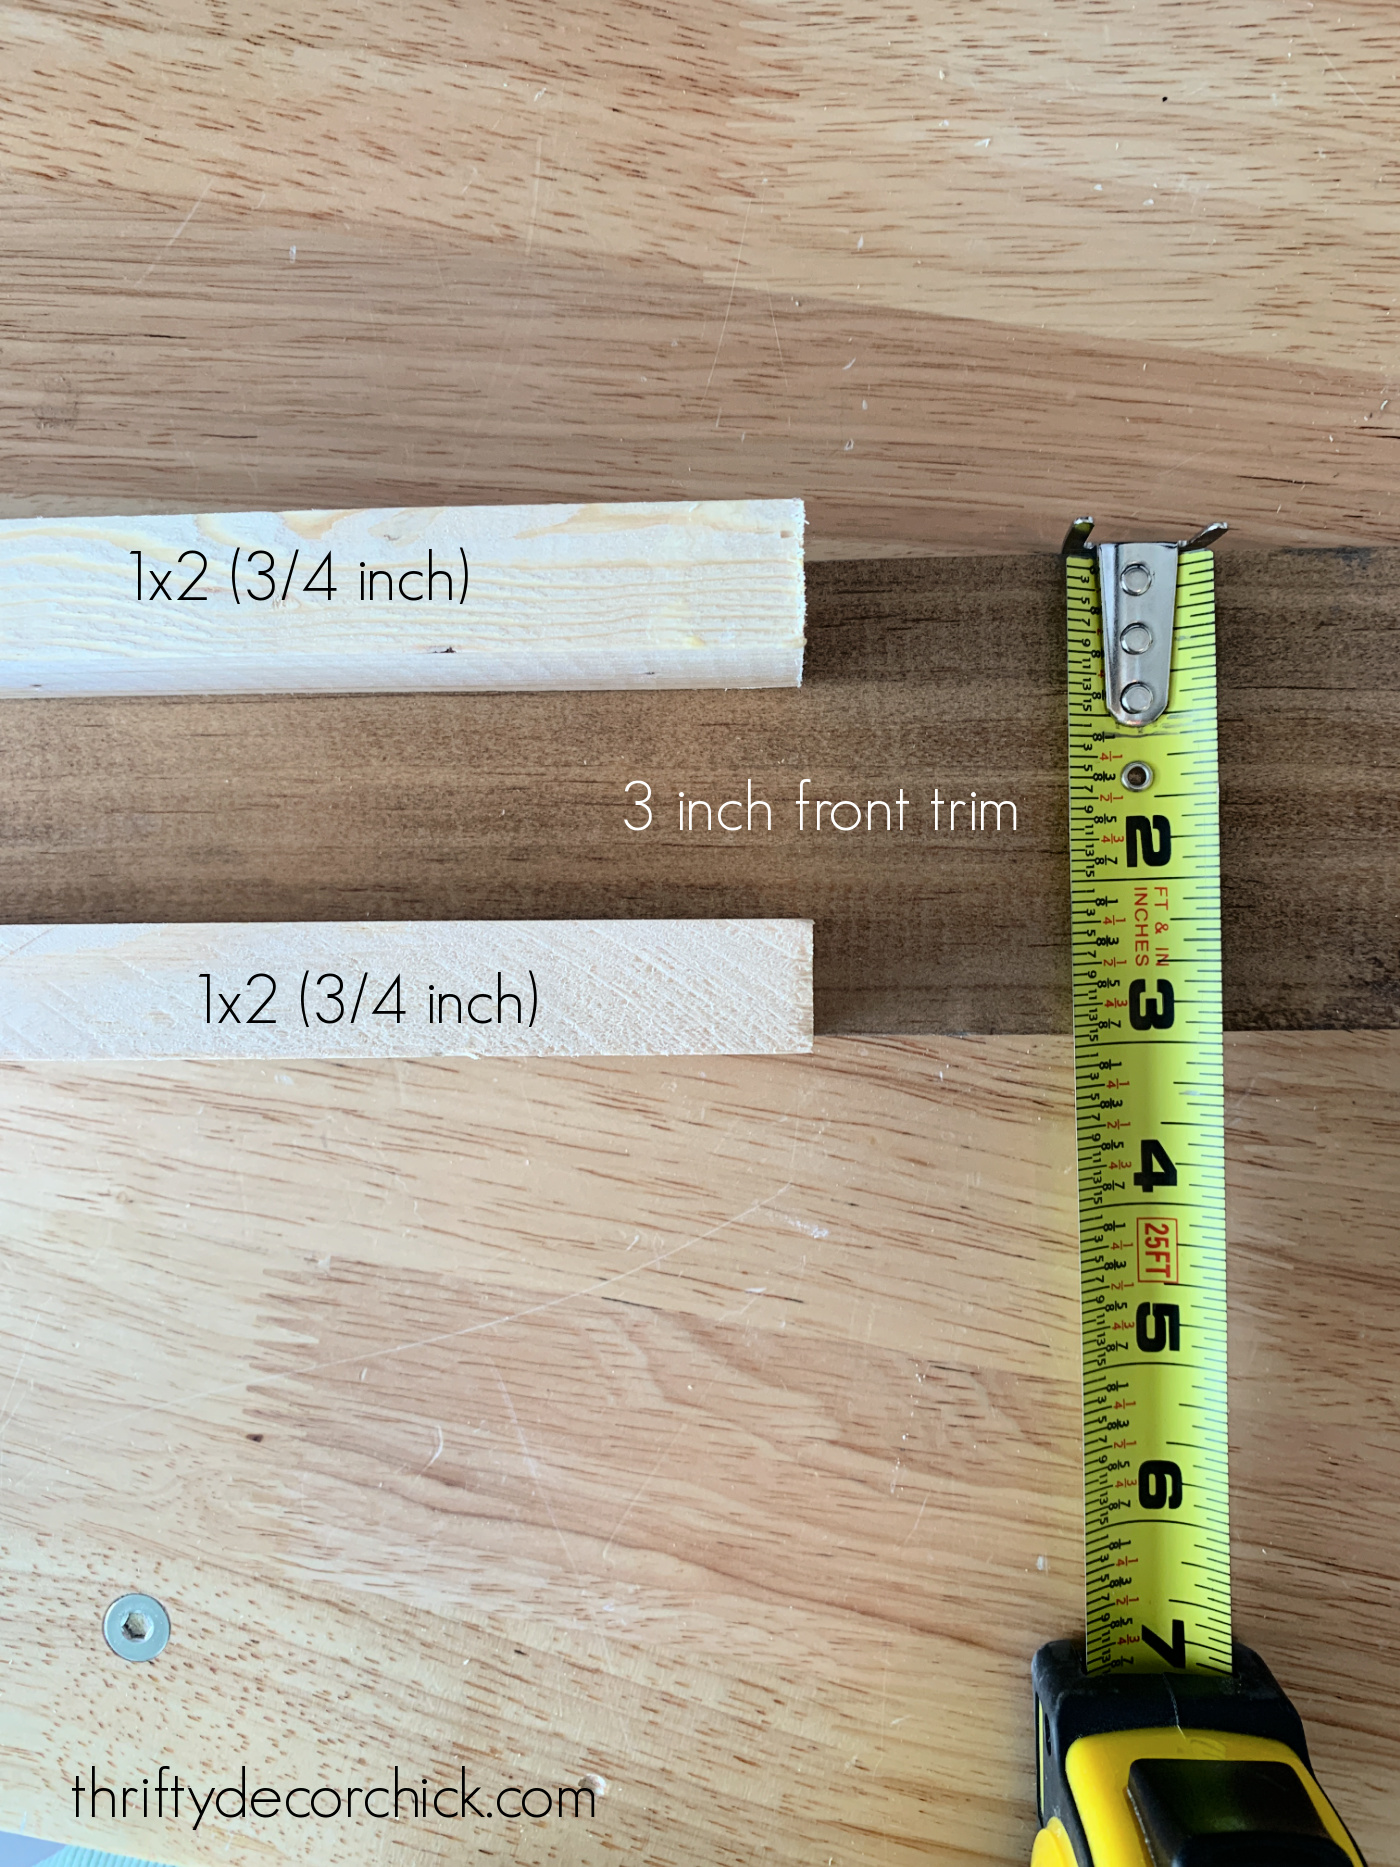 sizes for DIY shelf supports